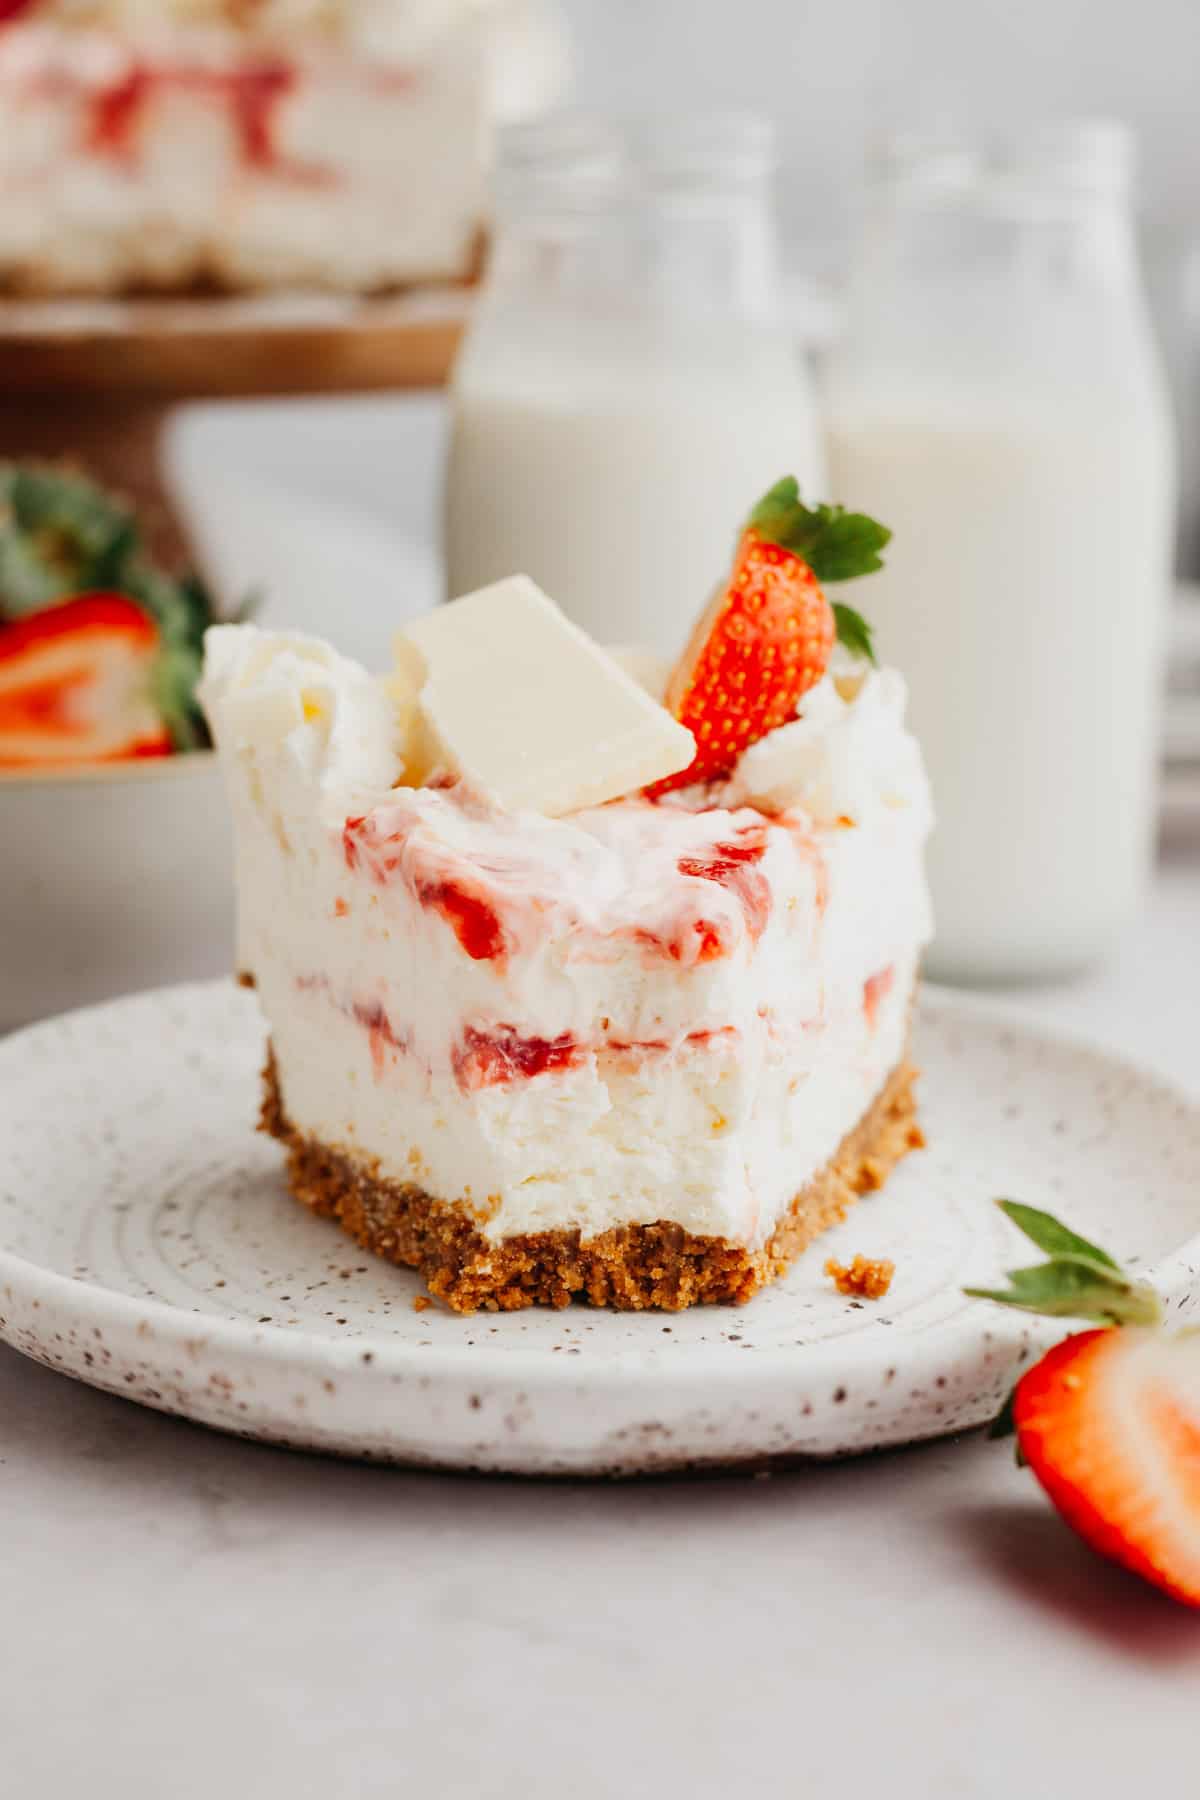 A white chocolate strawberry cheesecake on a plate.